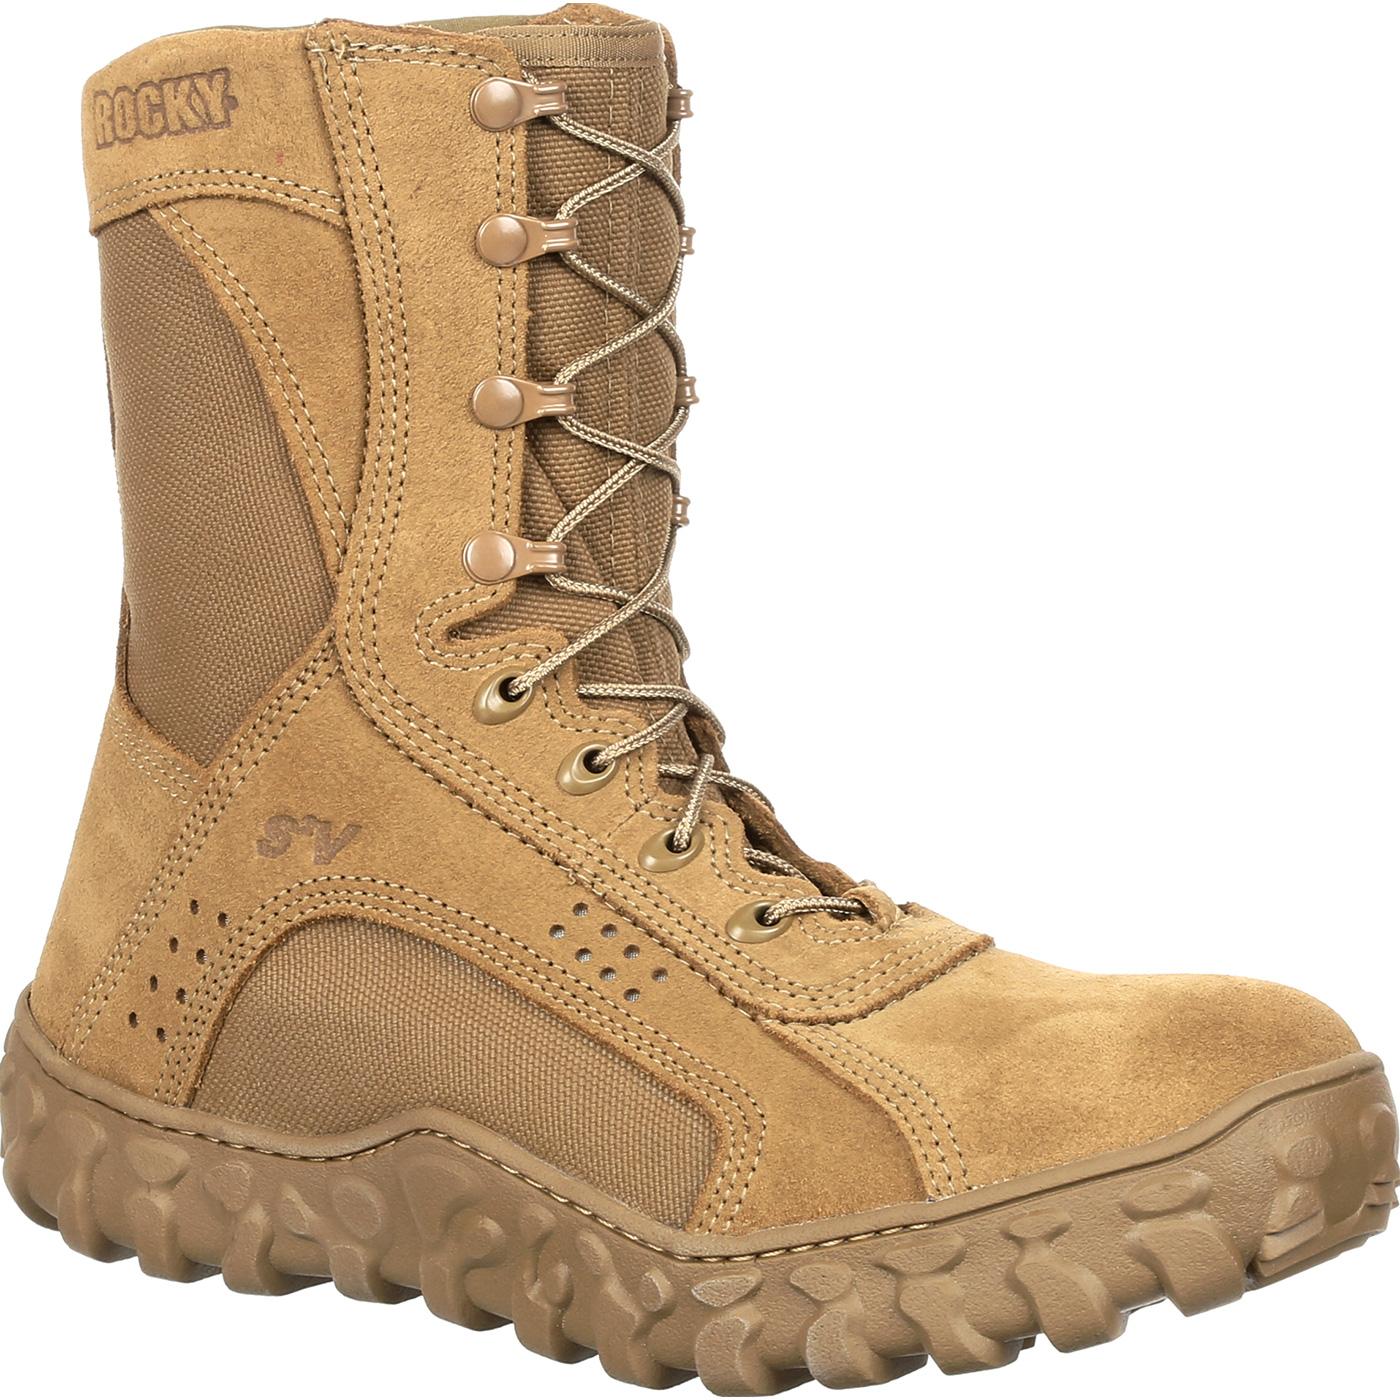 Rocky S2V: Composite Toe Tactical Military Boot, RKC089